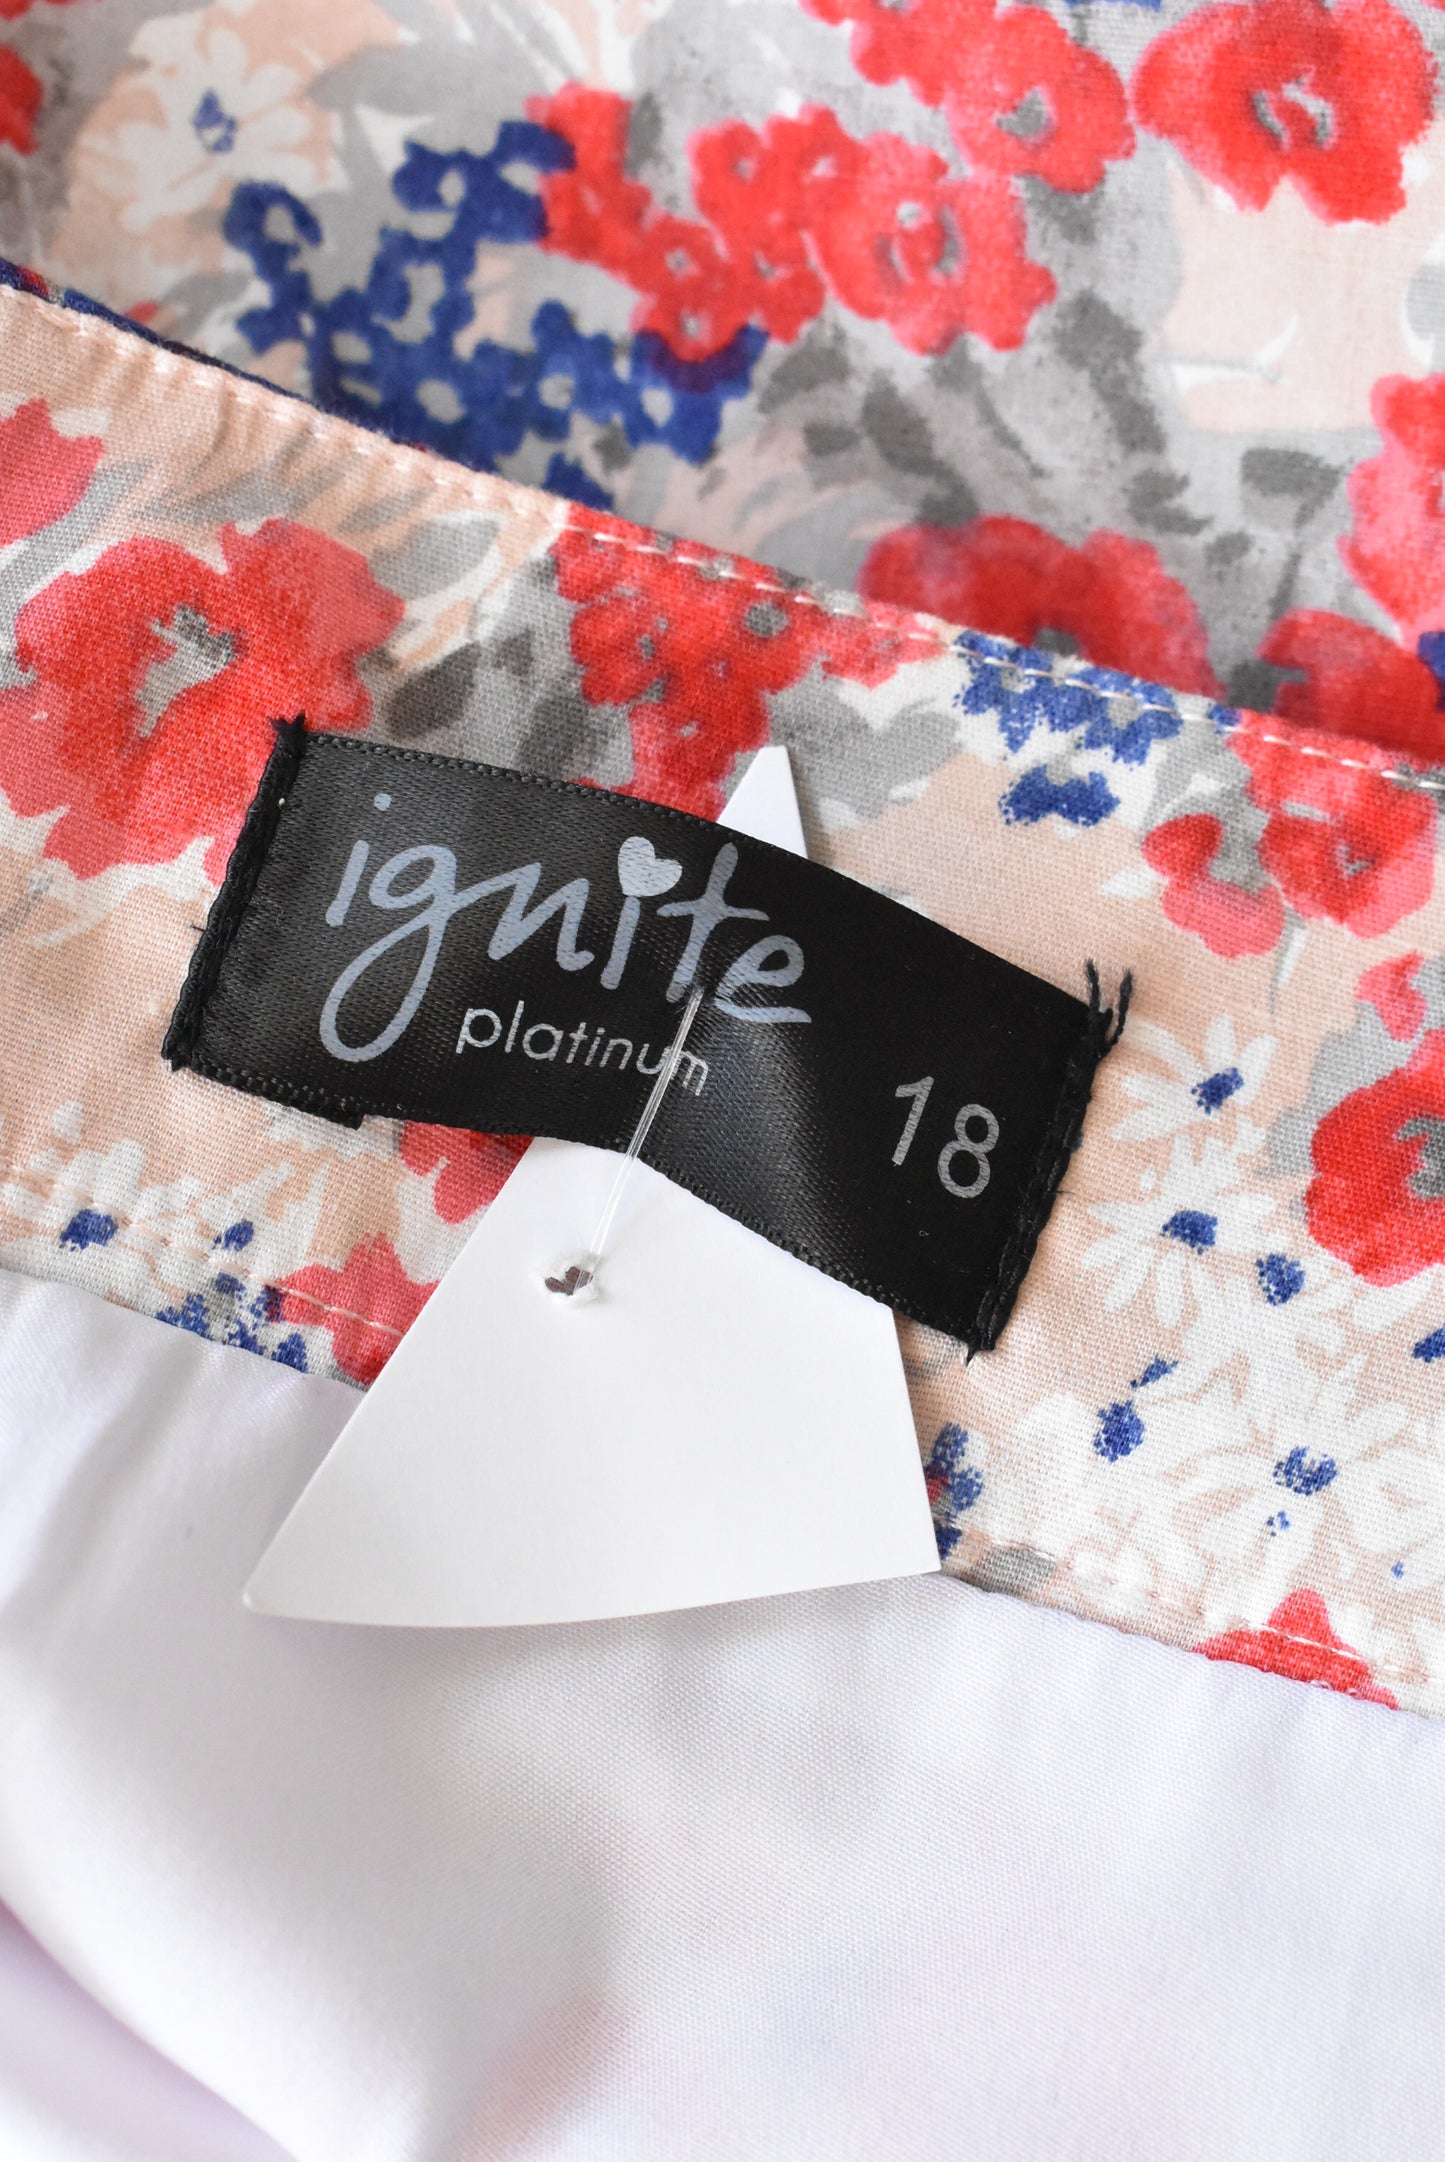 Ignite floral A-line skirt, S